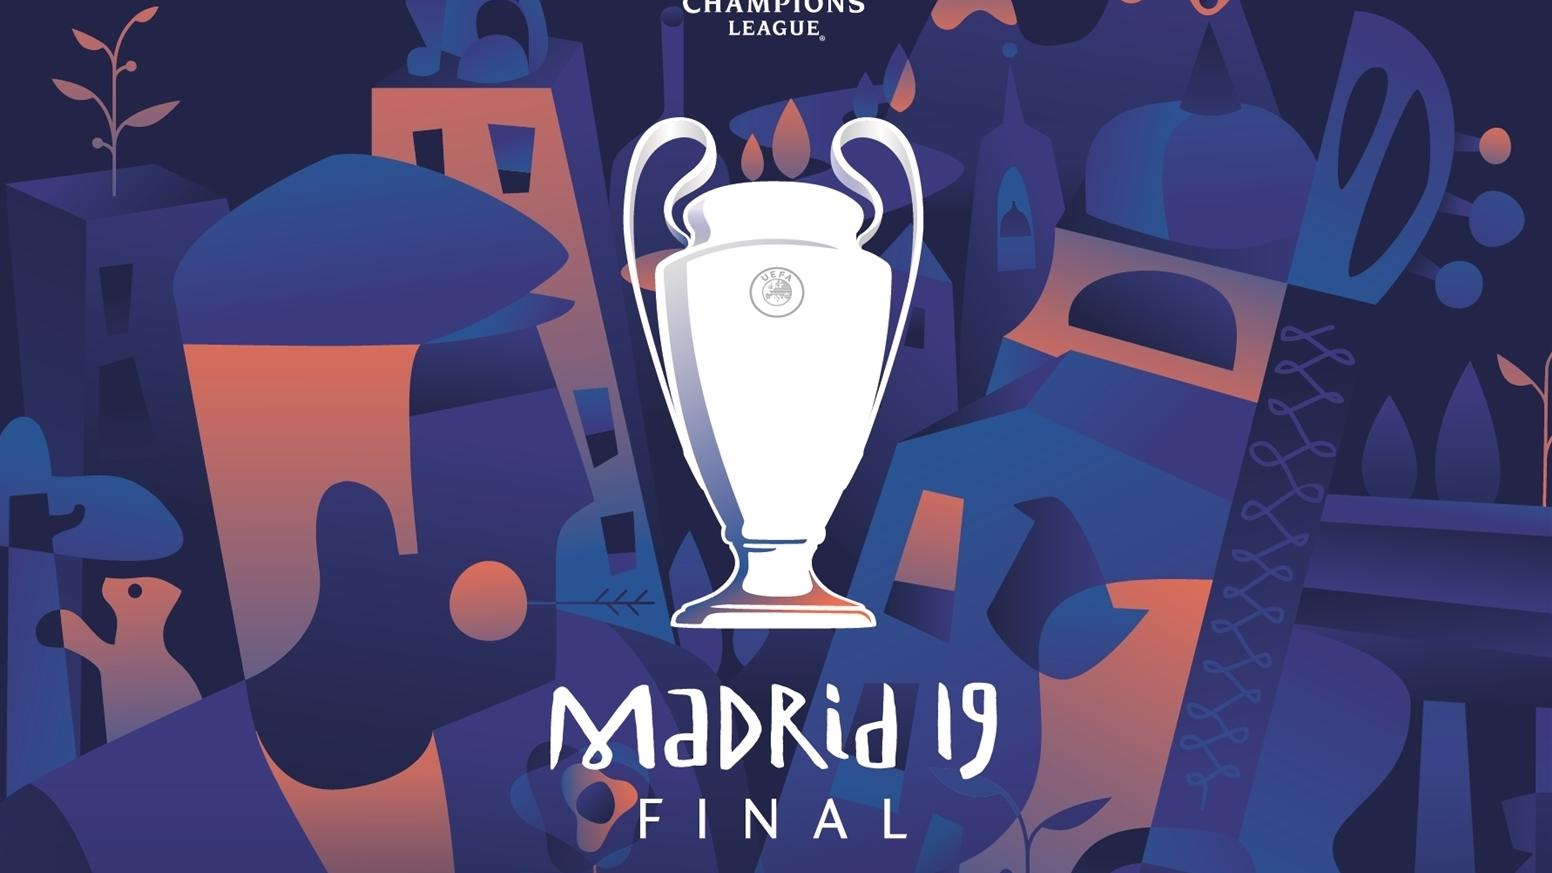 tickets to champions league final 2019